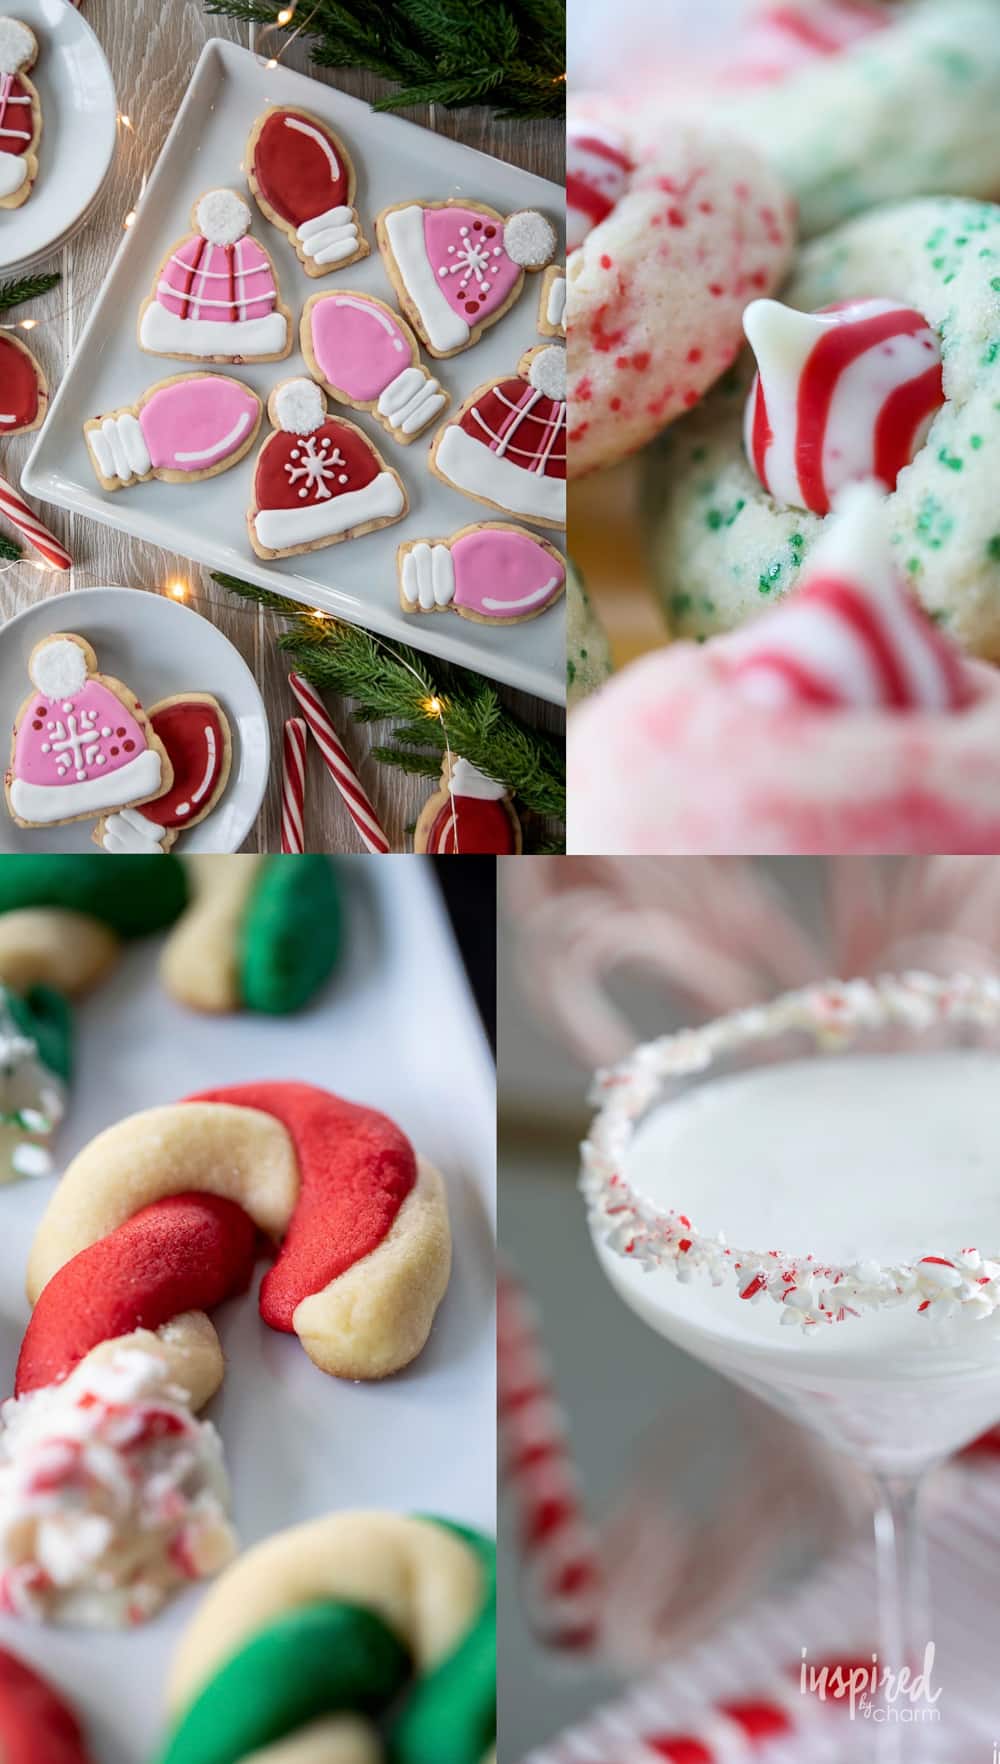 Merry & Minty: Irresistible Peppermint Recipes